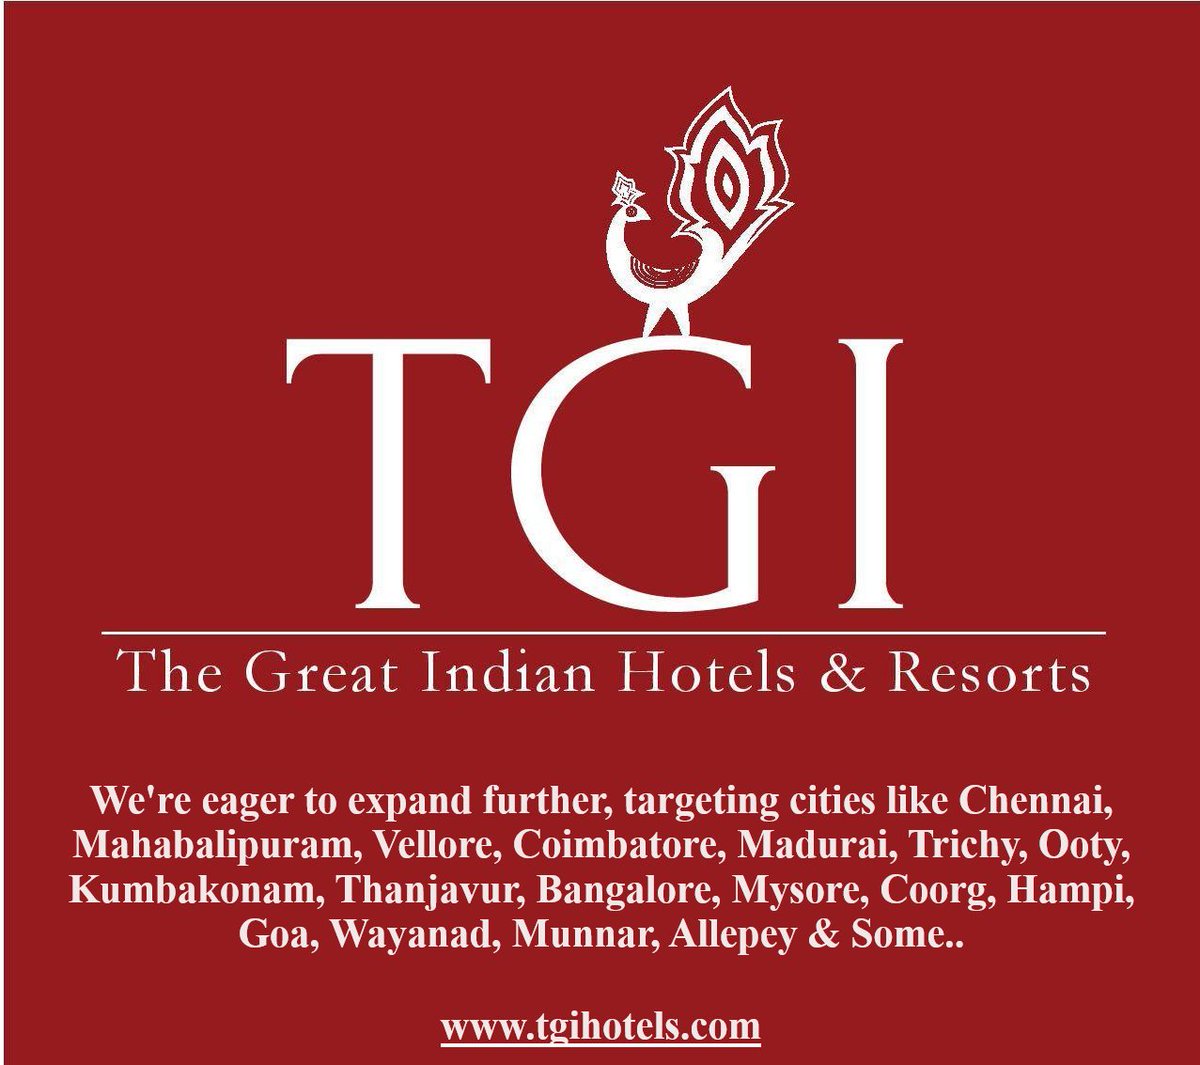 The Great Indian Hotels & Resorts, TGI Group of Hotels eager to expand their hotels in Thanjavur, Kumbakonam, Trichy, Madurai, Vellore ........
@tgi_hotels 

#Thanjavur #Kumbakonam #Hotels #Resorts  @NewThanjavur